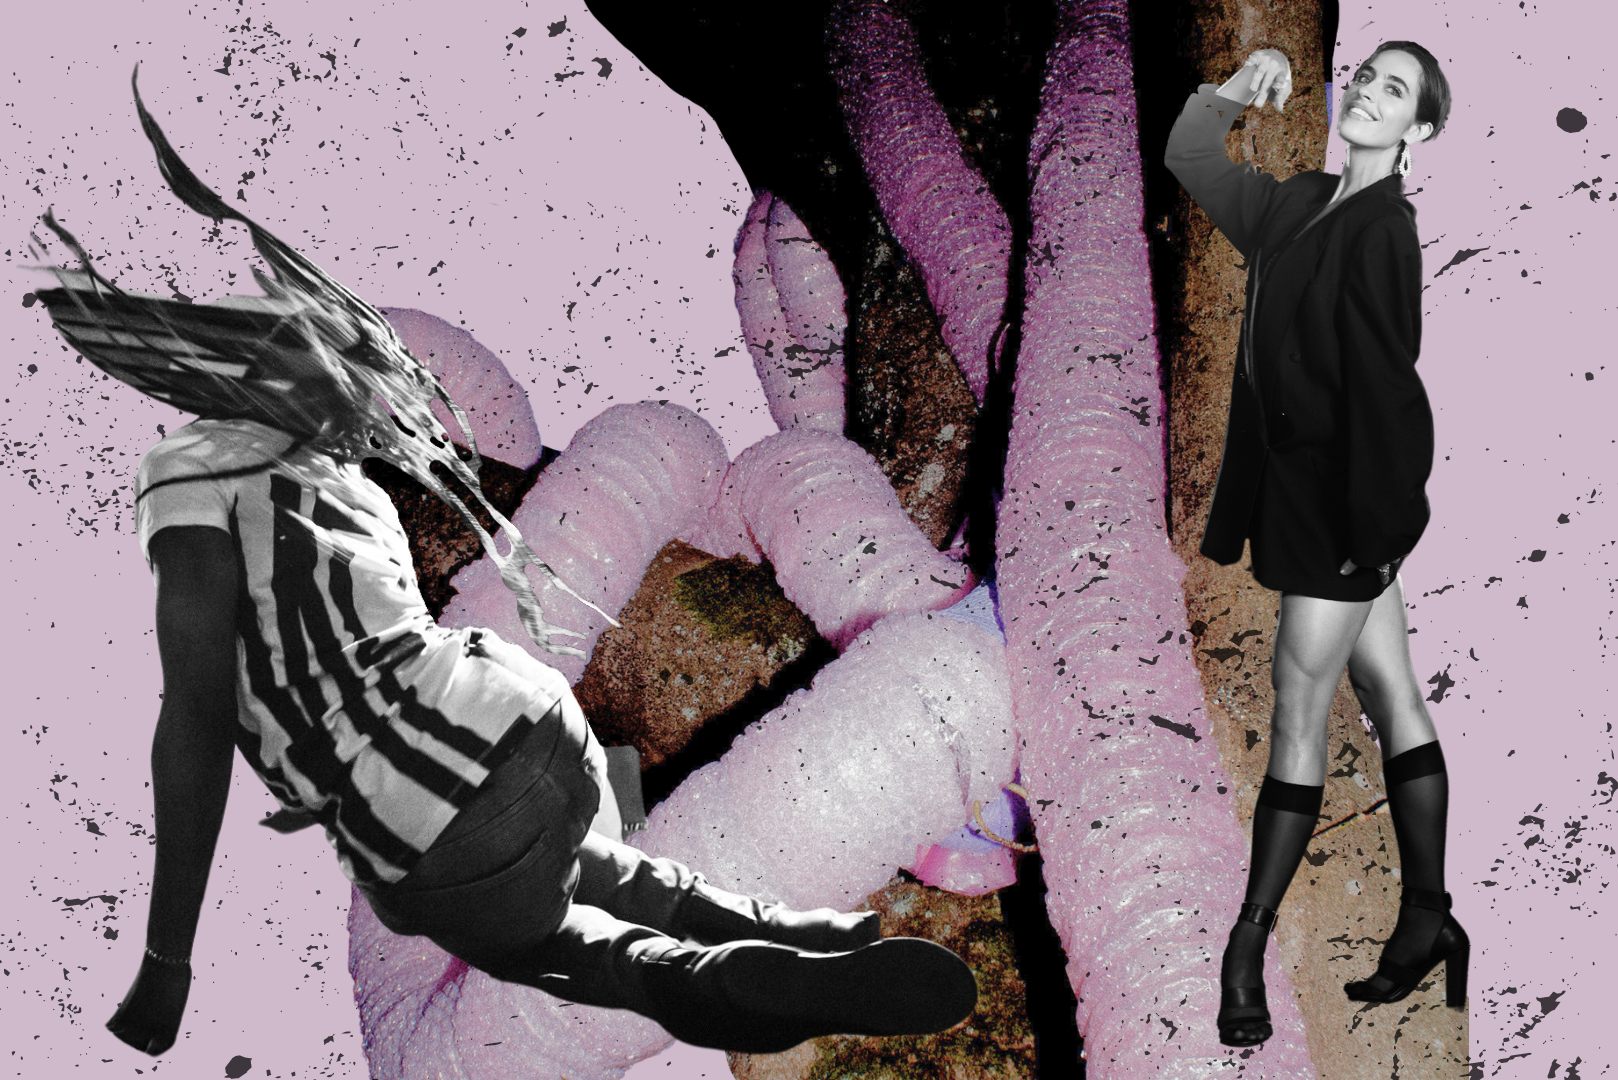 A collage image of the three Ballroom artists. Matthew “Snoopy” is on the ground whipping their long hair, Chéline stands smiling and posing with an arm raised, a tree is wrapped by pink fleshy worms in the background.